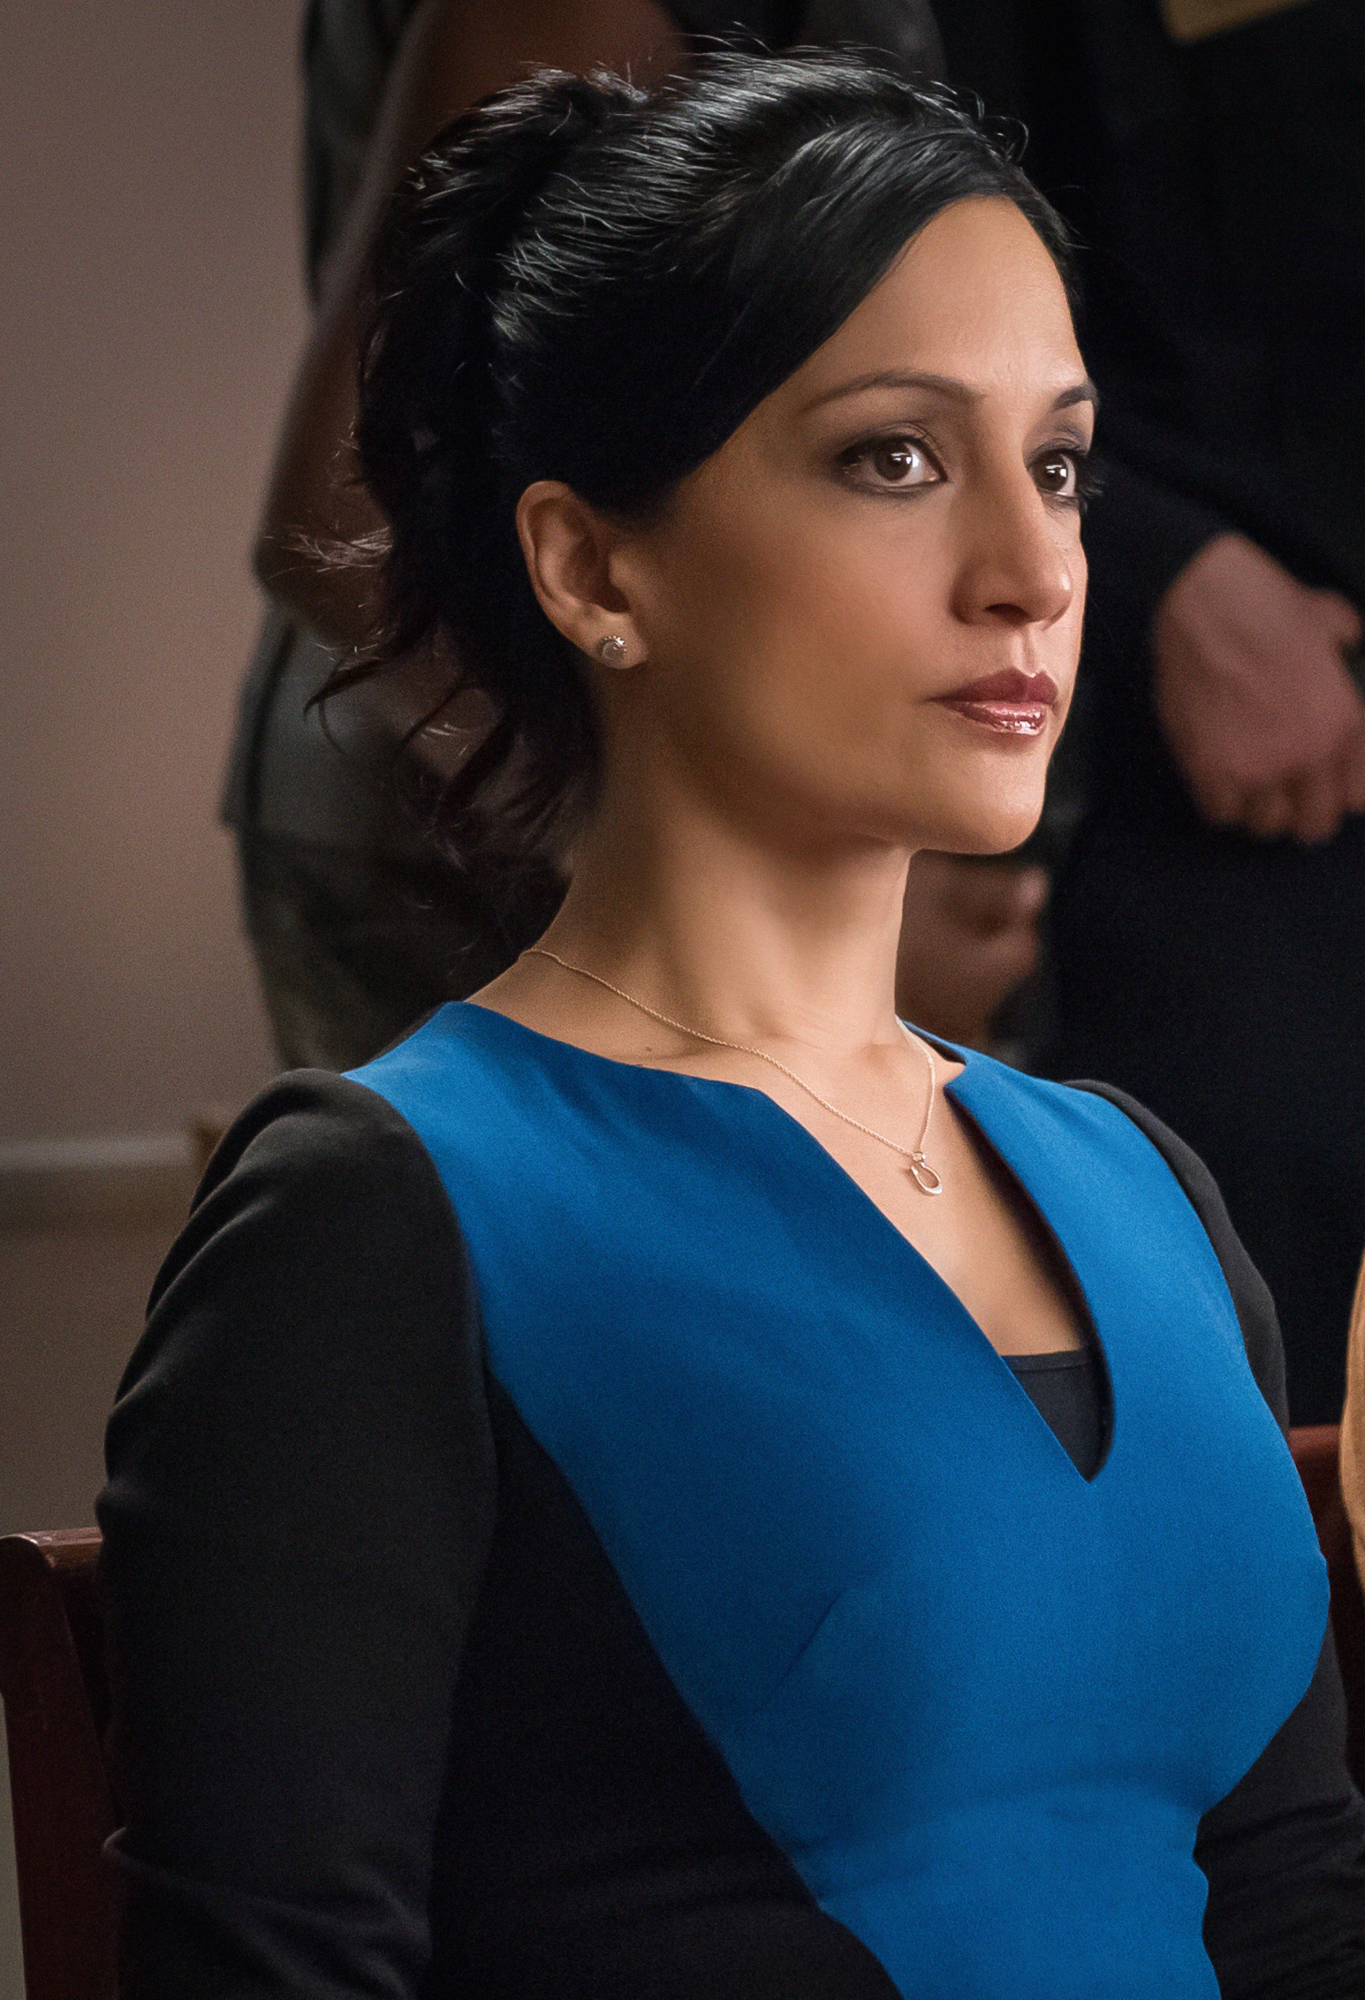 The Good Wife Kalindas Departure, Archie Panjabi Leaves the Show Time